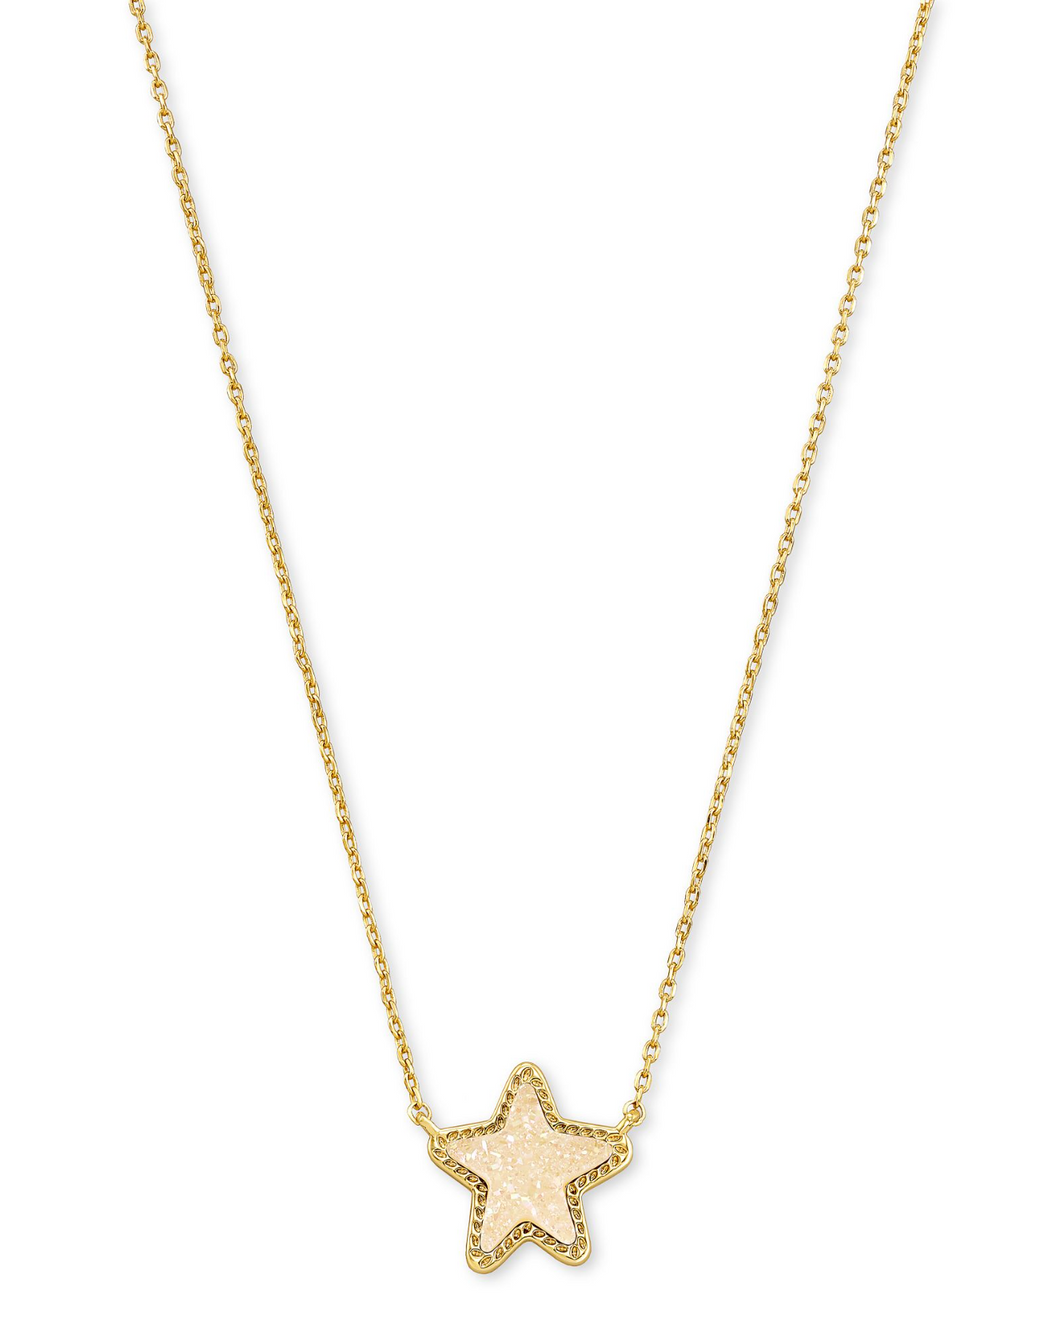 Jae Star Gold Pendant Necklace in Iridescent Drusy by Kendra Scott